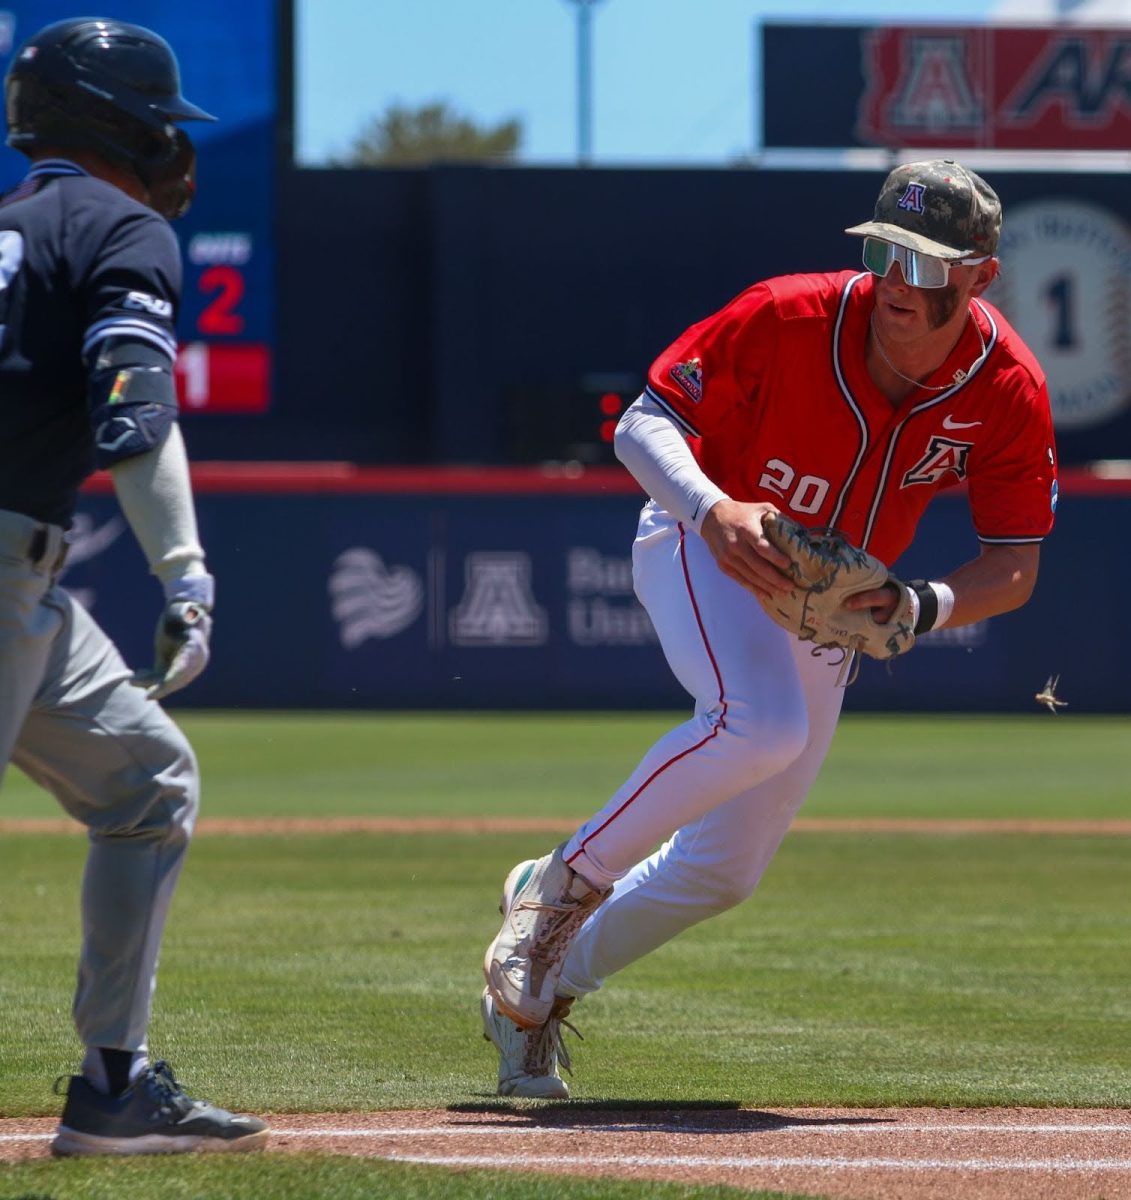 Tommy Splaine tracks down the batter heading towards base for the out on June 1 at Hi Corbett Field during the Tucson Regional of the NCAA Baseball Tournament. Despite being eliminated from the tournament, Arizona won both the regular season and tournament Pac-12 titles.